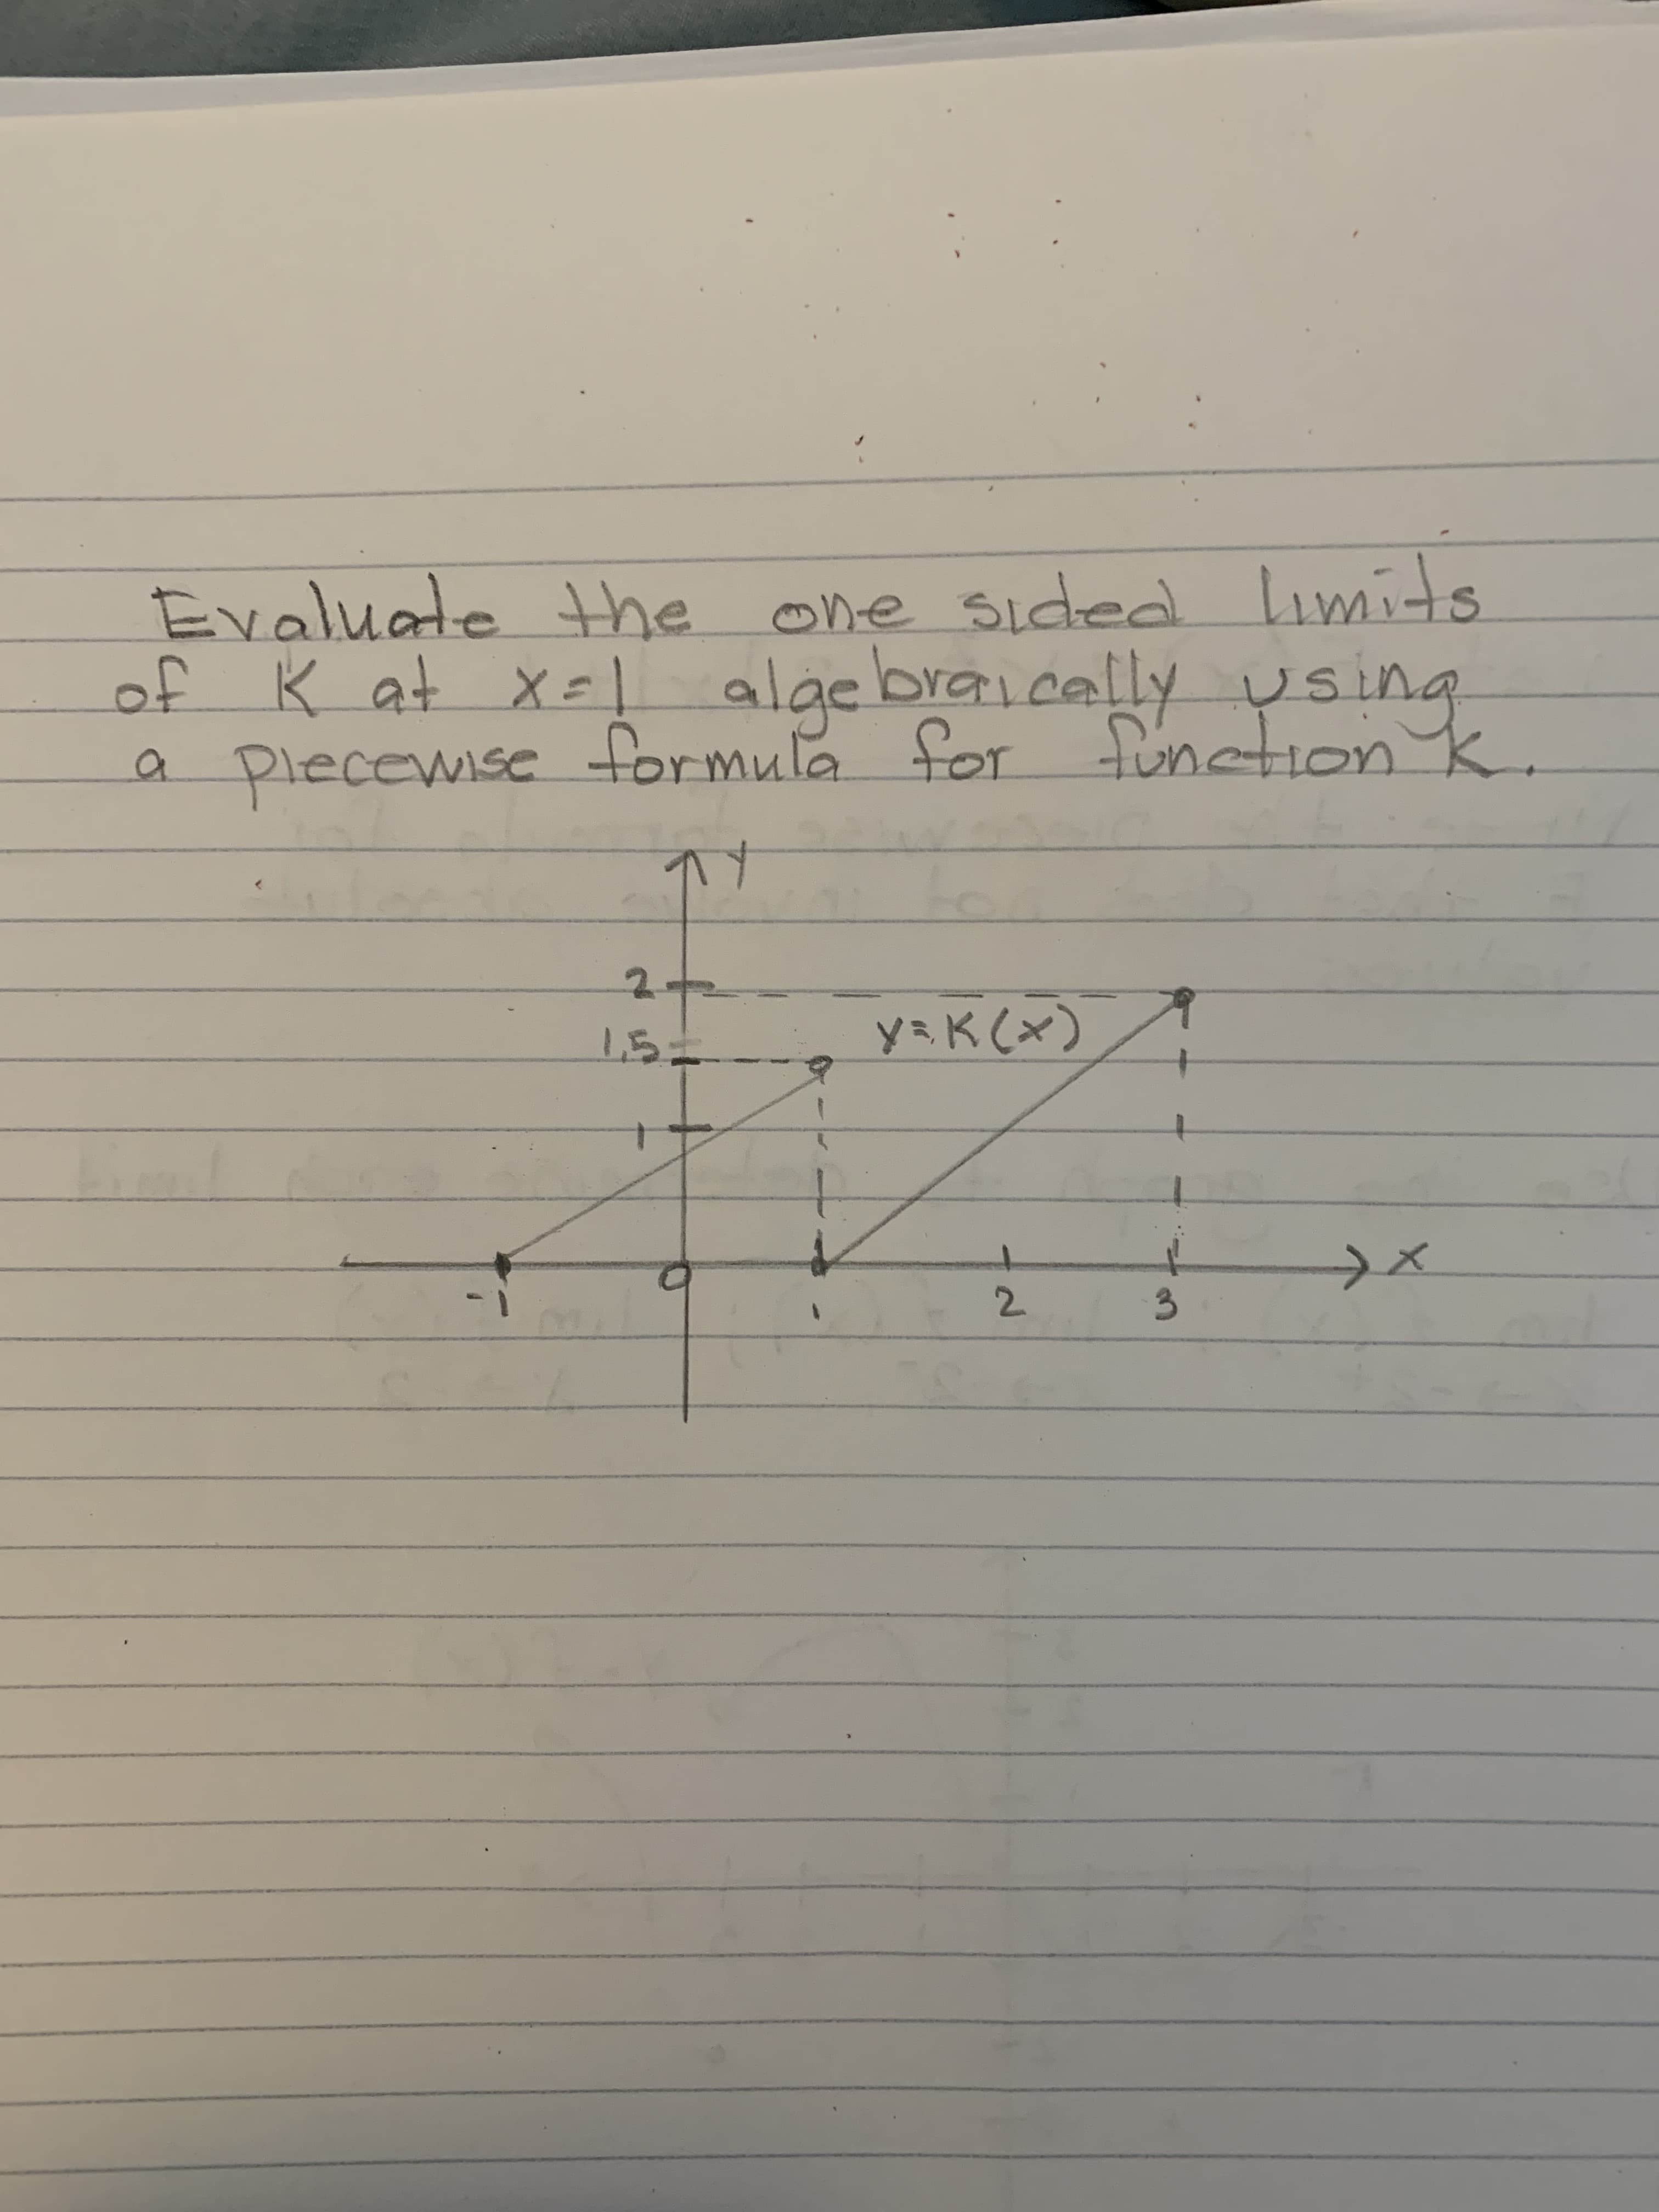 Evaluate the one sided limits
of K at x=L algebraically using
ly Usina
a plecewise formula for functionk
2.
y3K (x)
2.
3.
